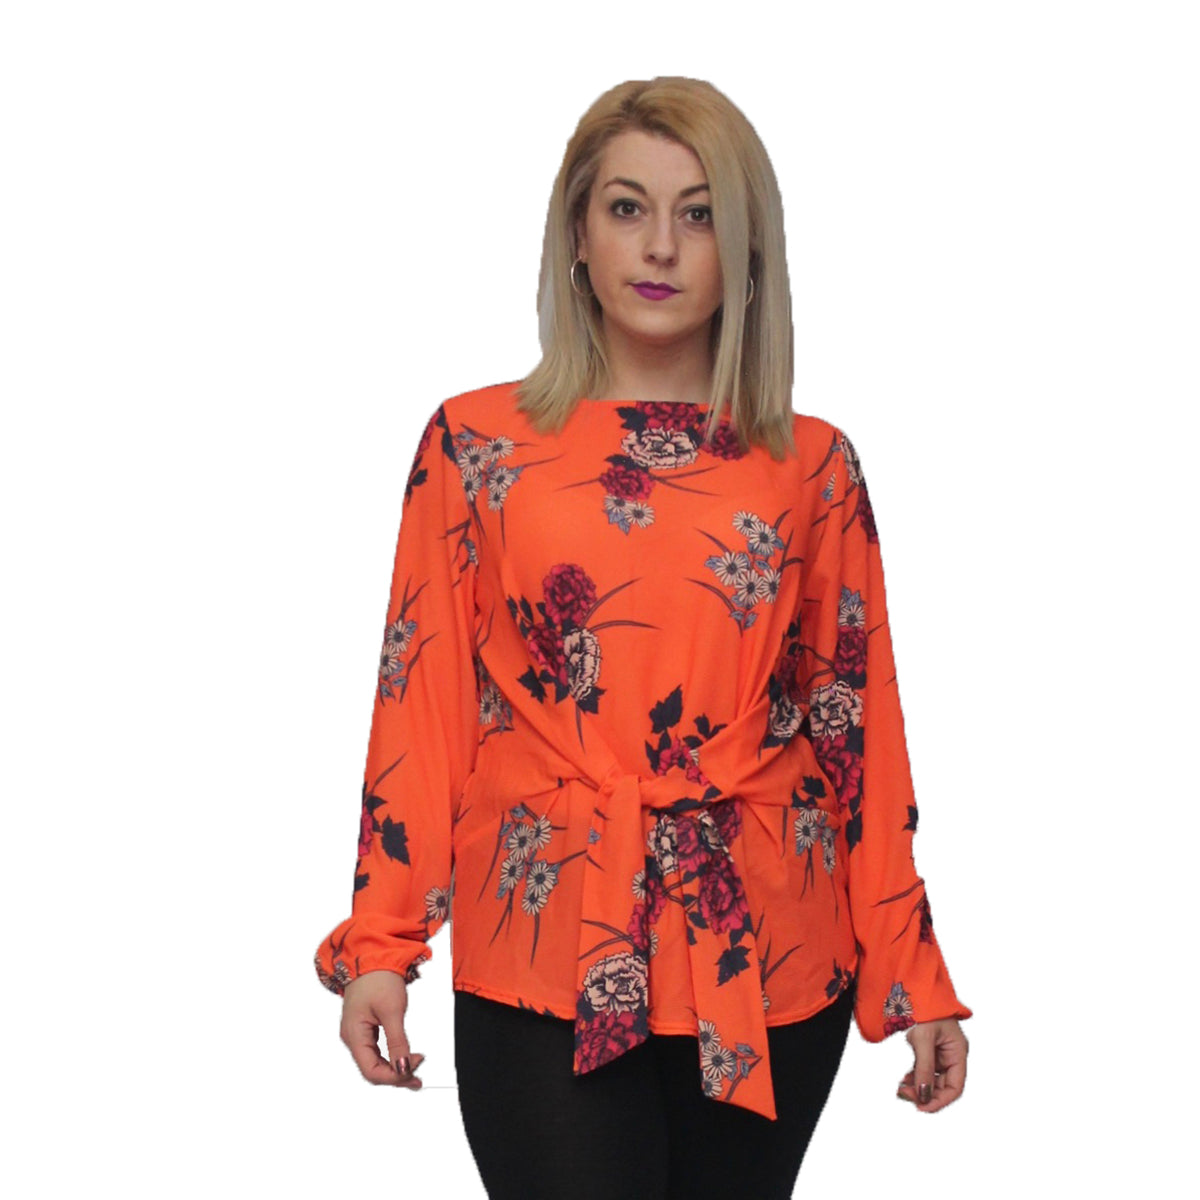 Front Tie Detail Blouse with Long Sleeves - Plus Sizes too